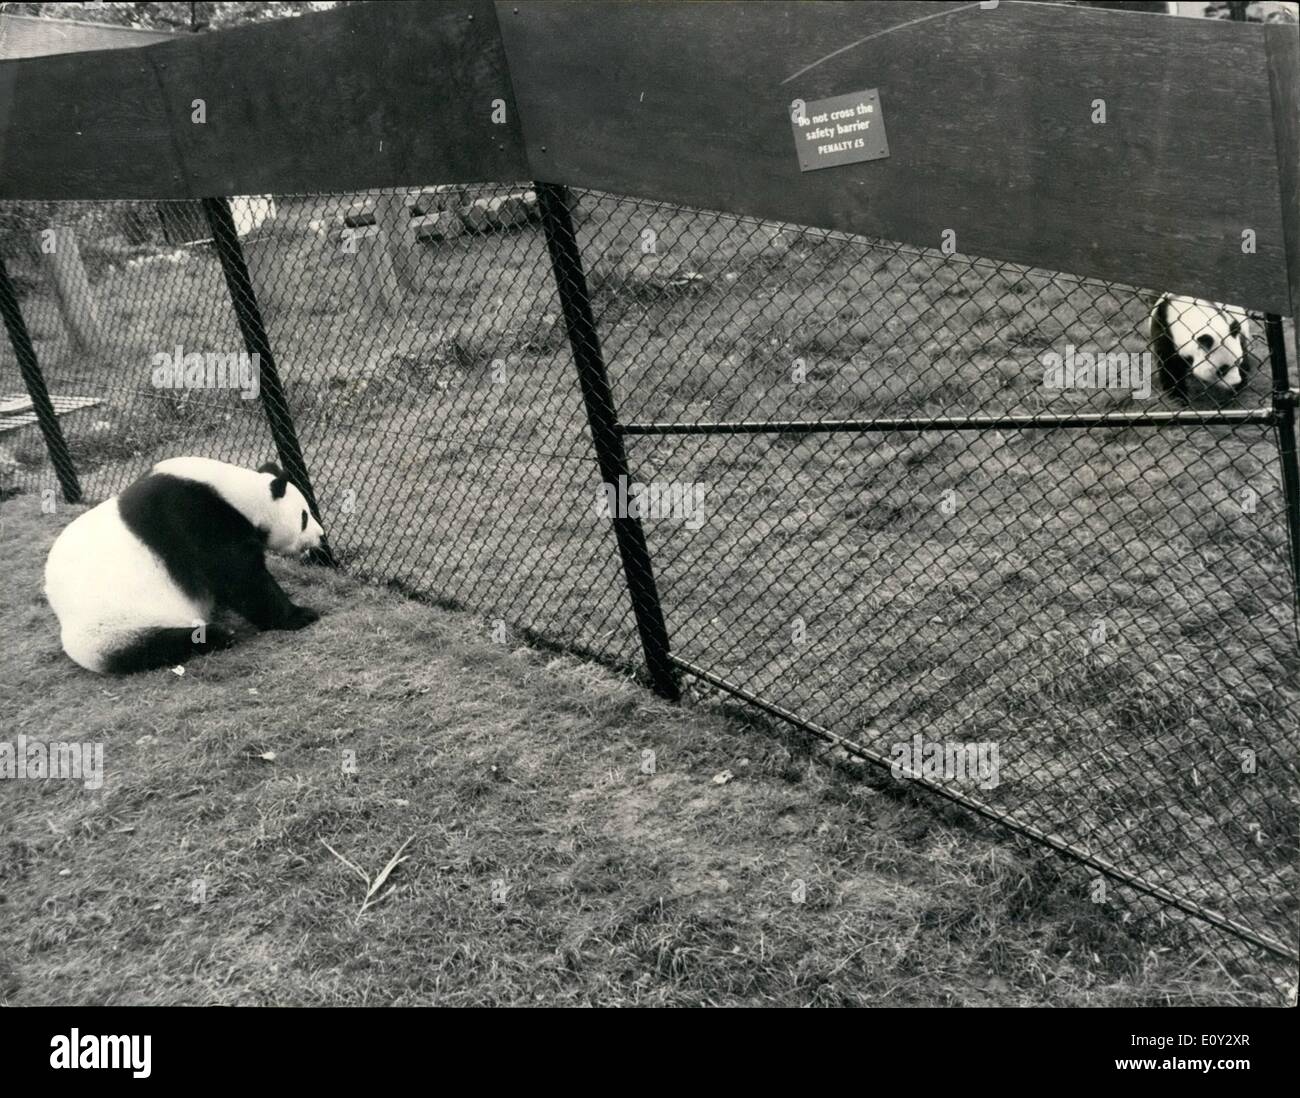 Sep. 09, 1968 - The Continued Courtship of Chi-Chi and An- An: An- An, the Russian giant panda, is at London Zoo to Continue his courtship with the London Zoo's female, Chi-Chi - following their unproductive meeting in Moscow two years ago. They are still separated by a wire fence that divides their Paddock. A Zoo official said''''We cannot tell yet when the fence can be opened so that that can get at closer quarters.'' Picture Shows: An-An, the Russian giant Panda, on left- looks on as Chi-Chi turna away with apparent disinterest. Stock Photo